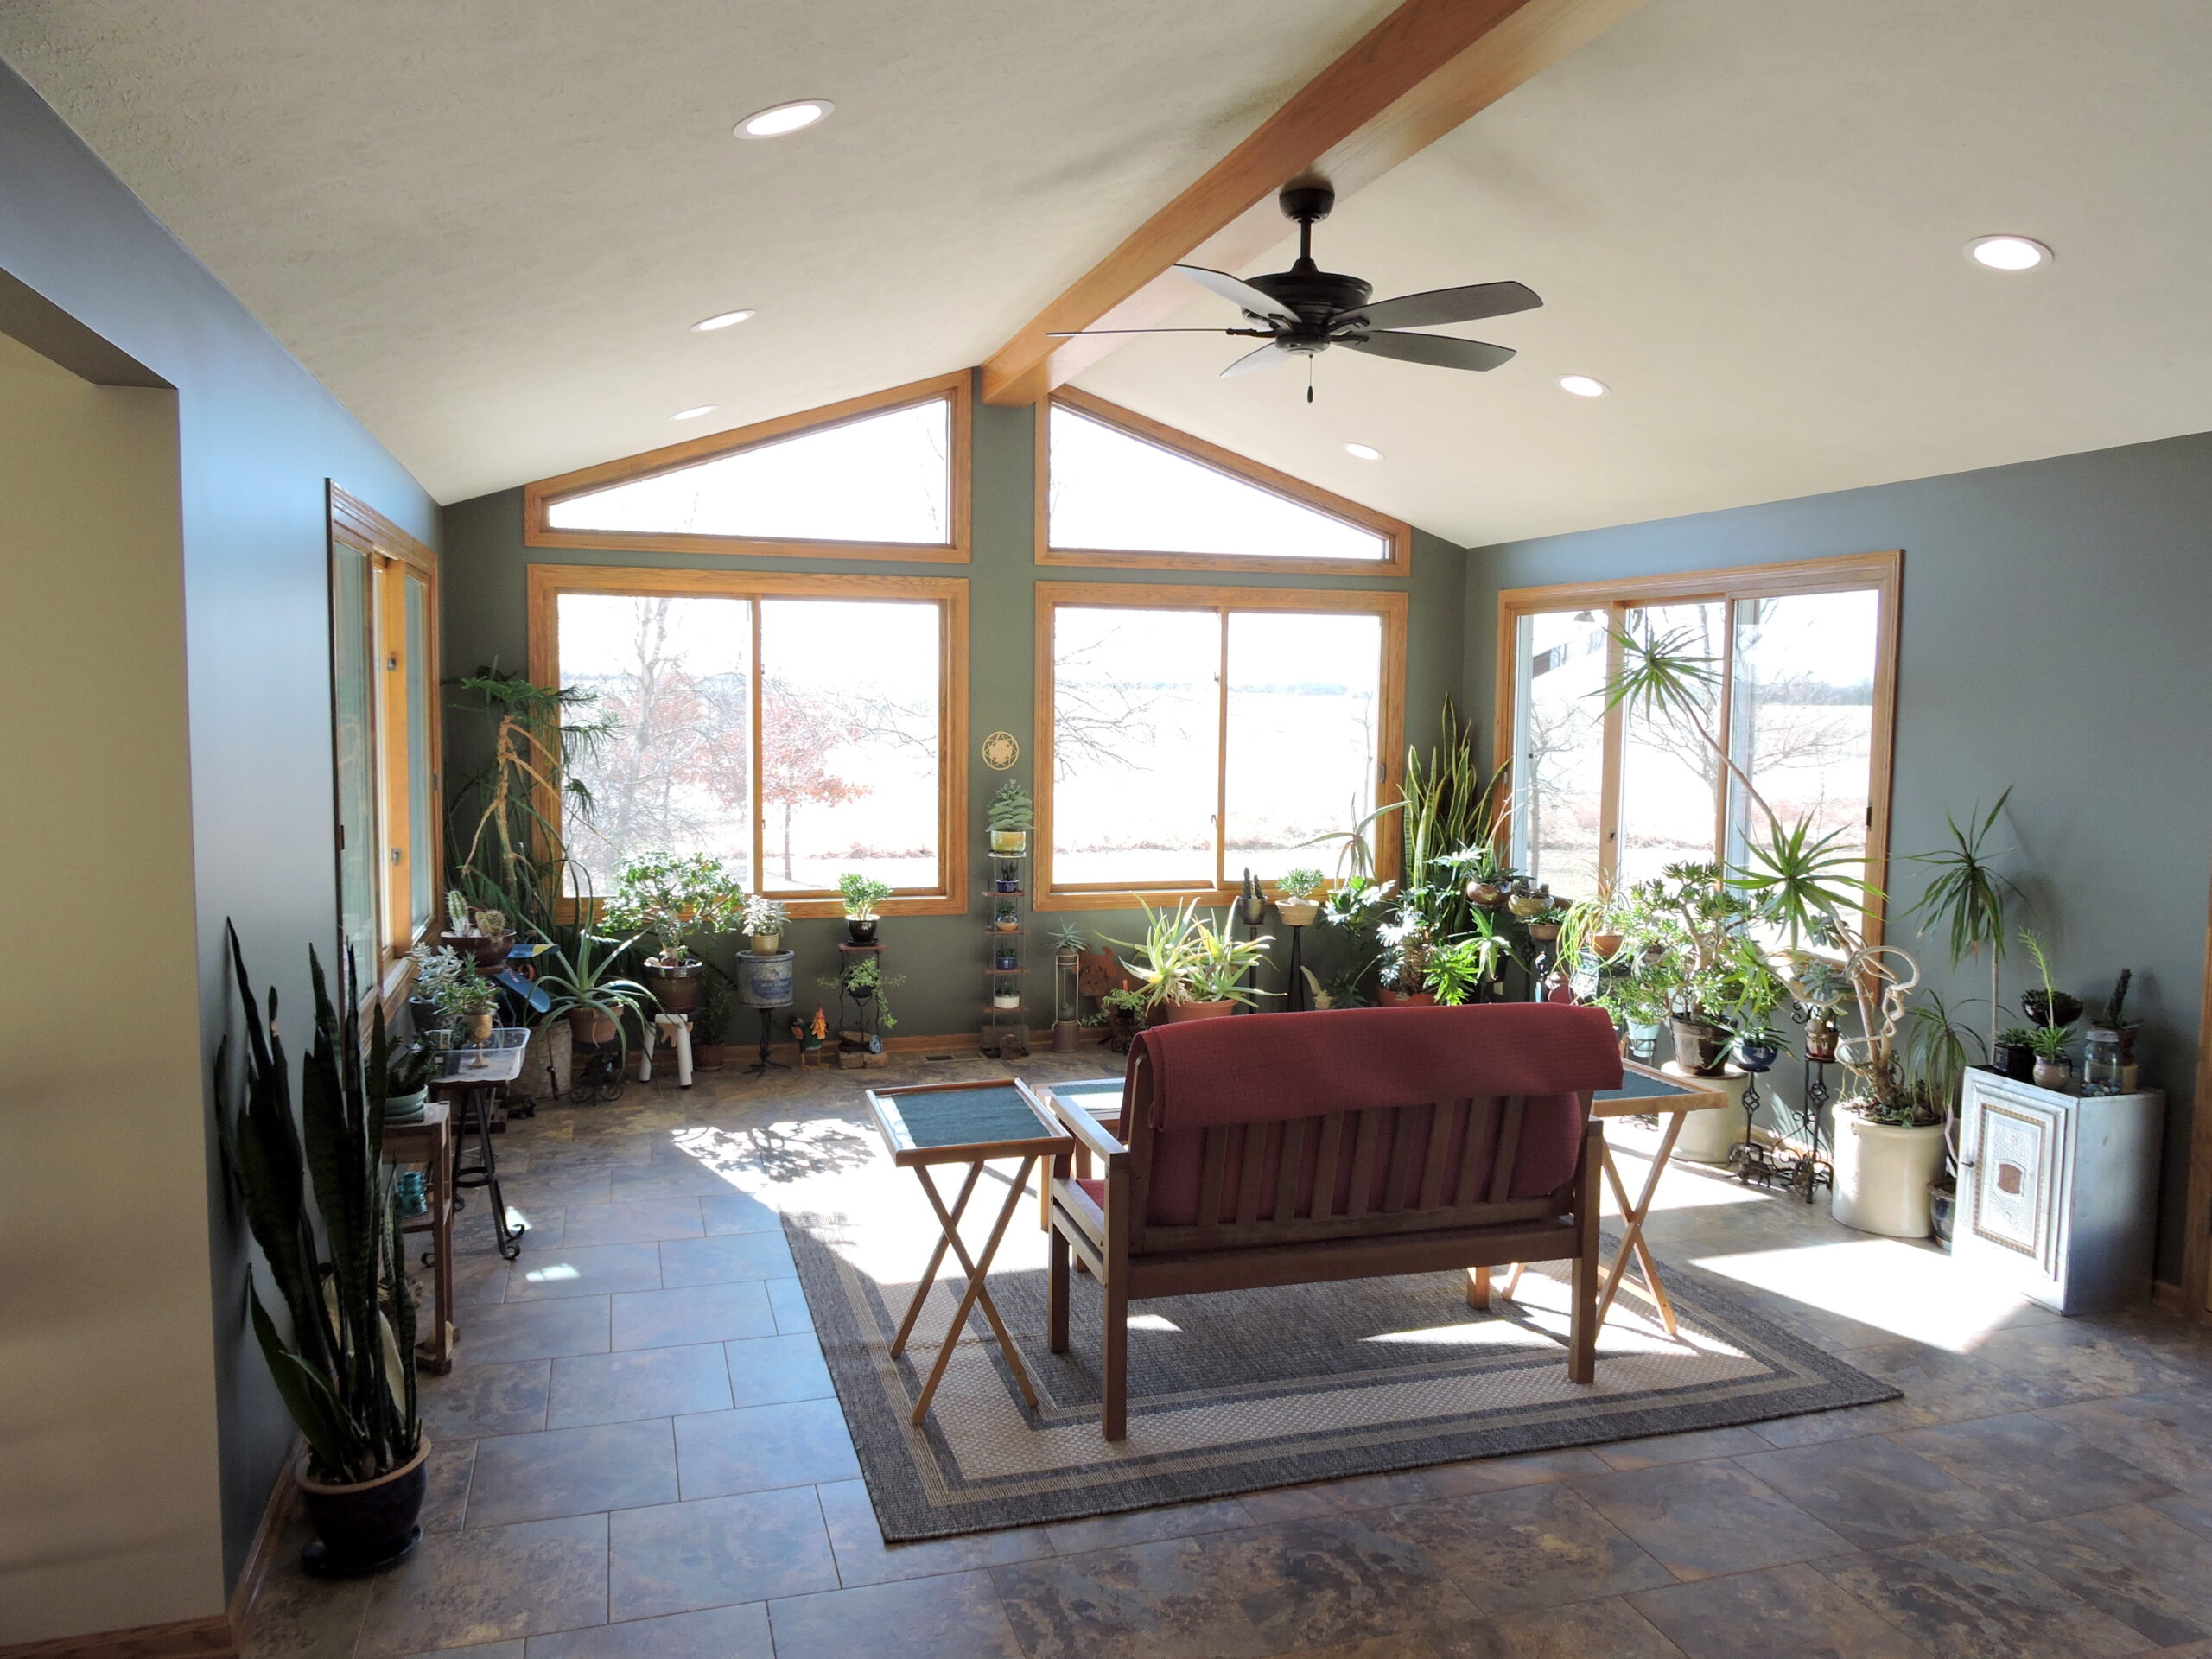 Sunroom addition with large windows and a ceiling fan. The walls are lined with plants.